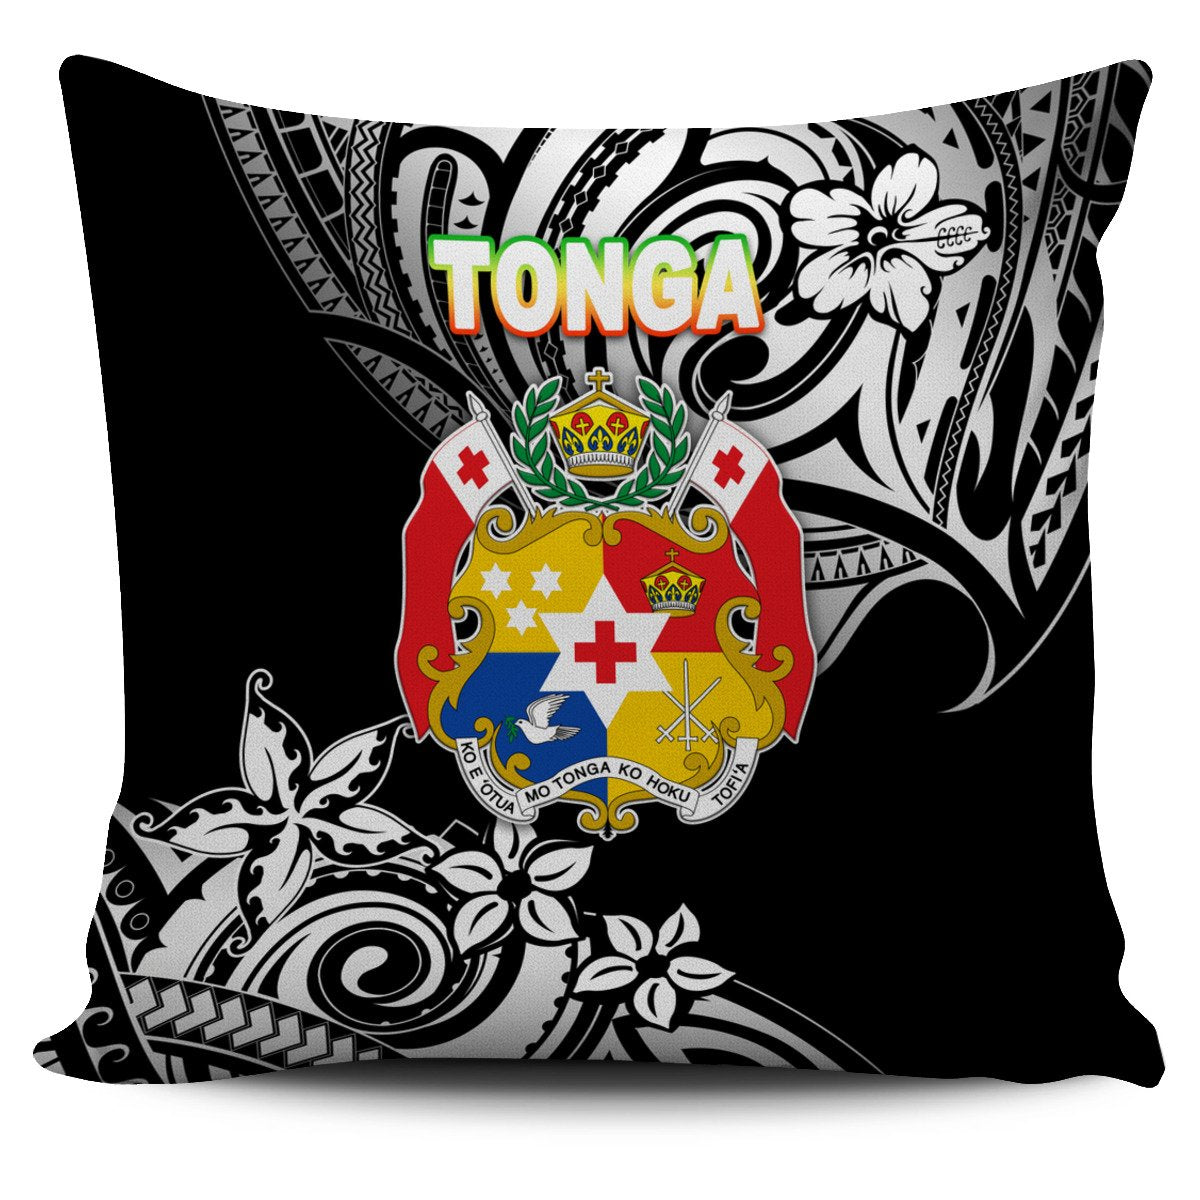 Mate Ma'a Tonga Rugby Pillow Cover Polynesian Unique Vibes - Black Pillow Cover One Size Black - Polynesian Pride